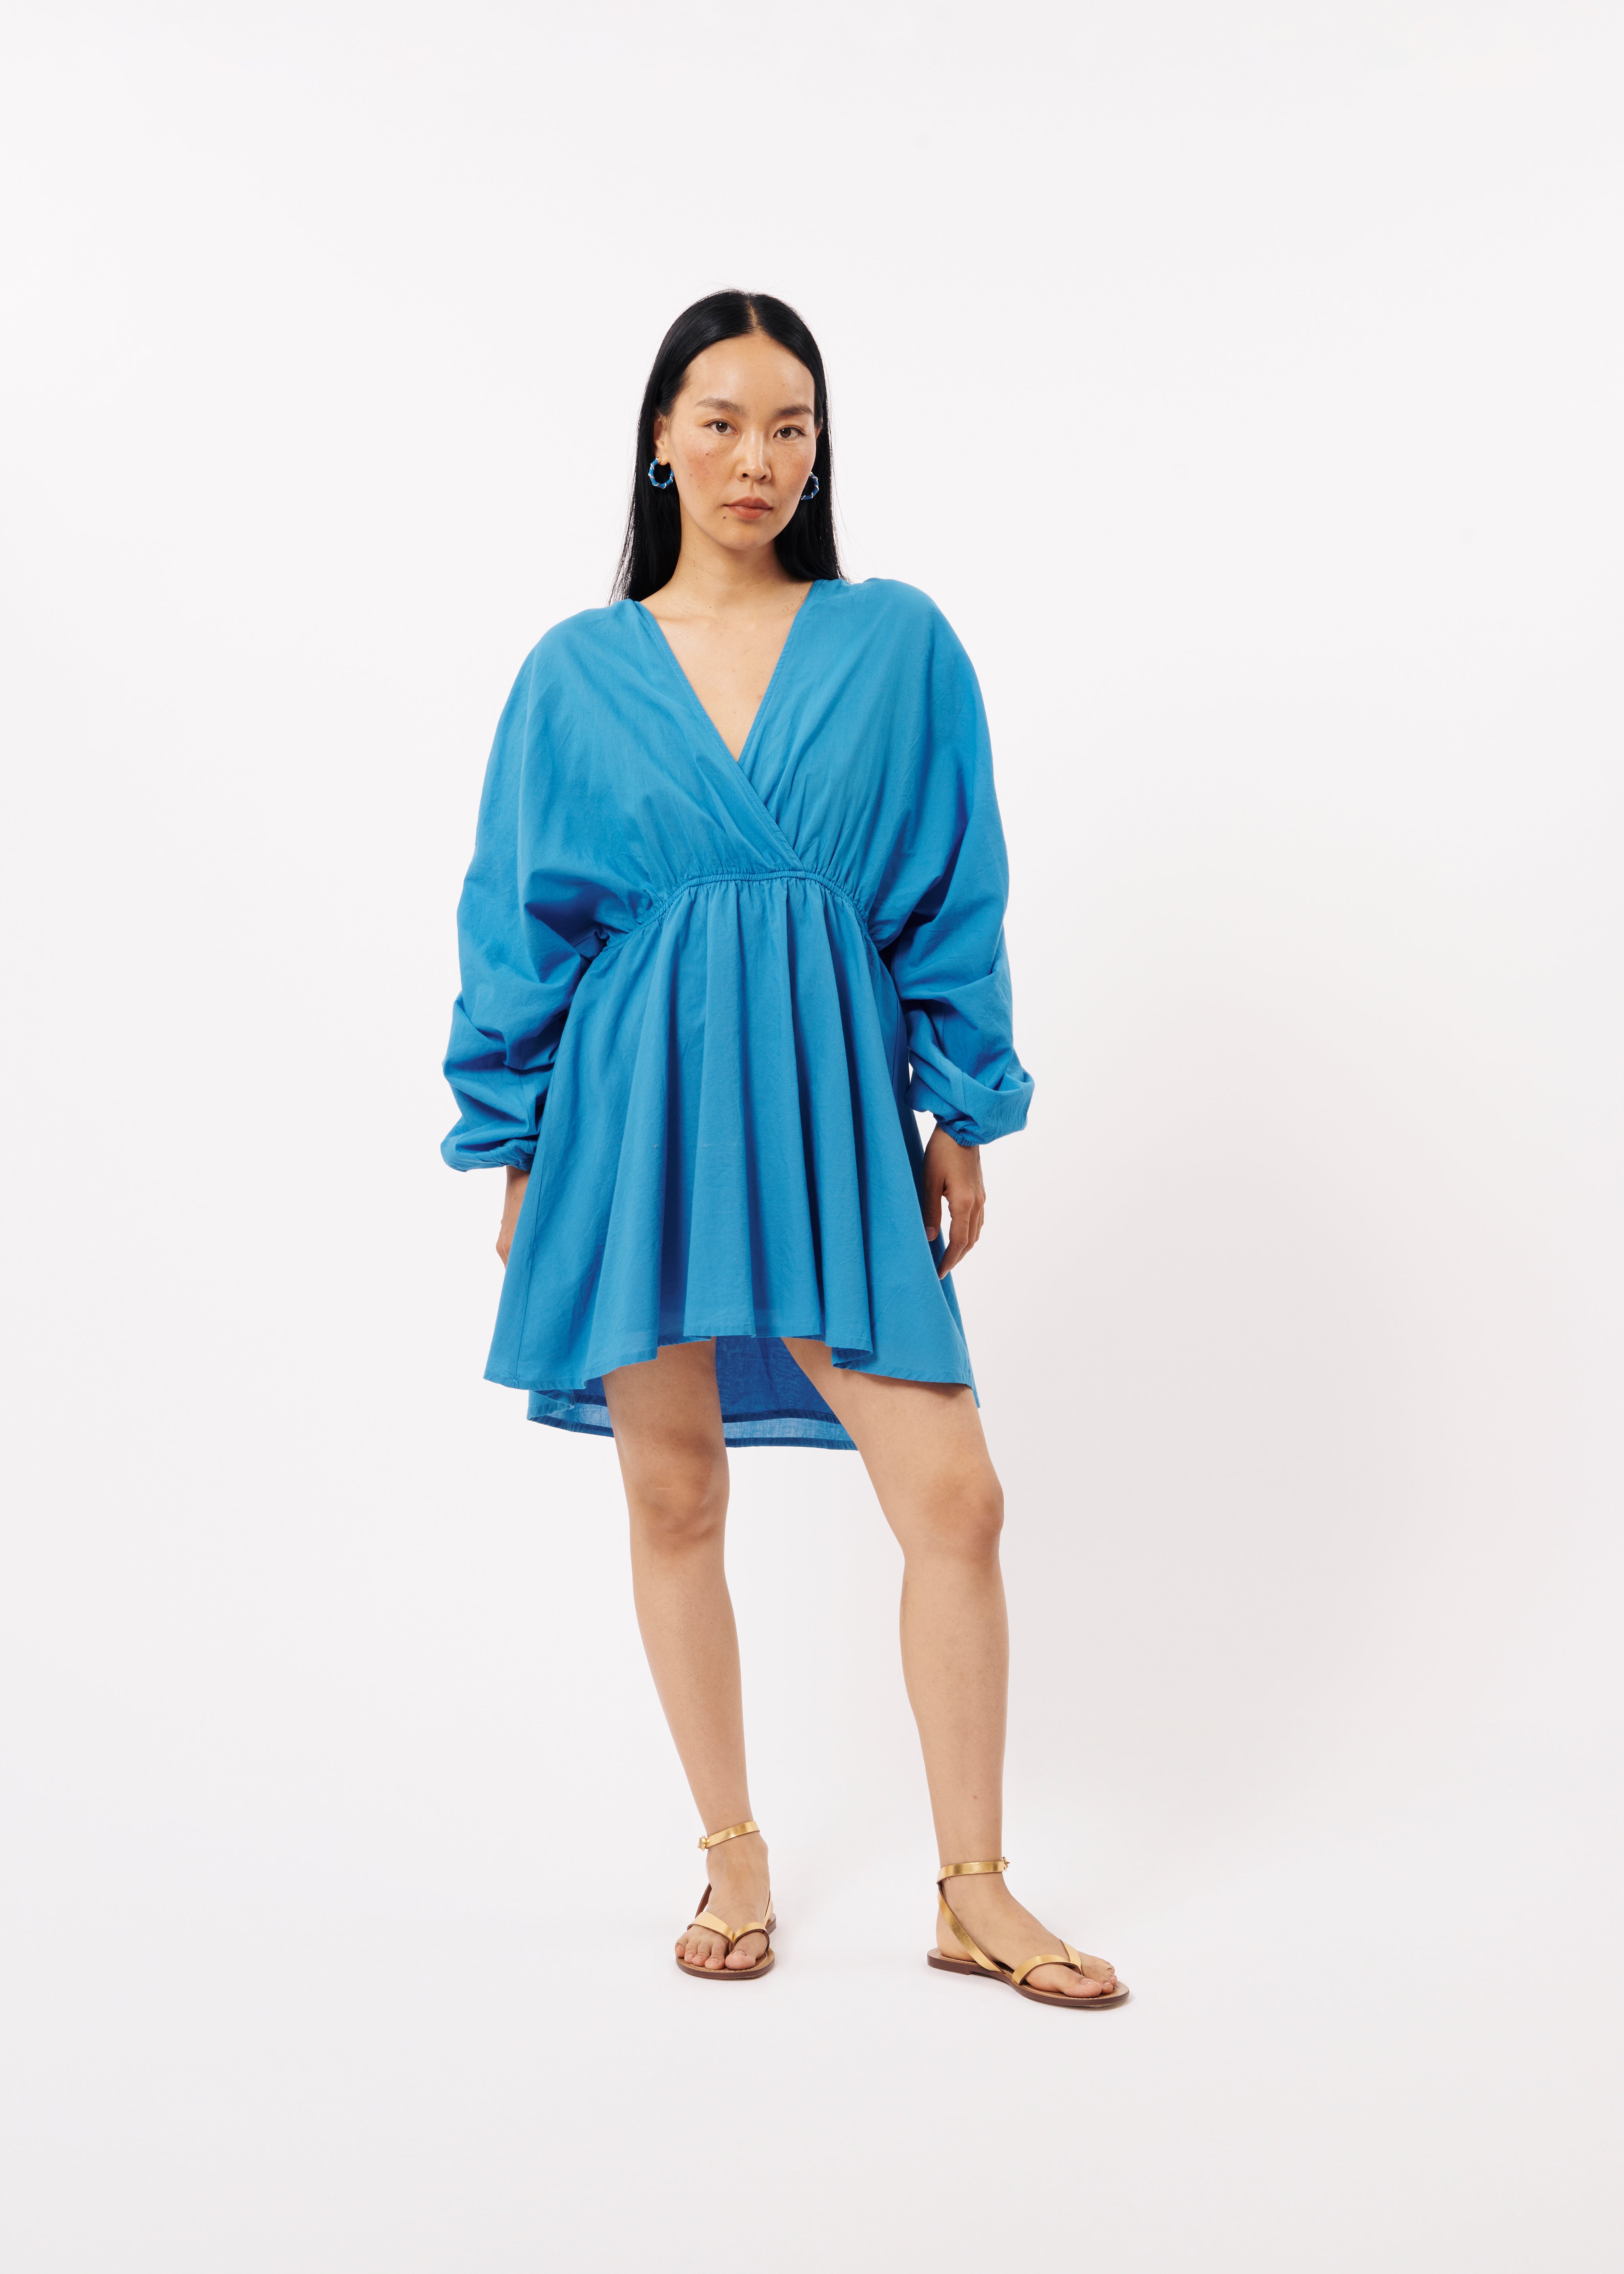 ANDREAS ELECTRIC BLUE DRESS